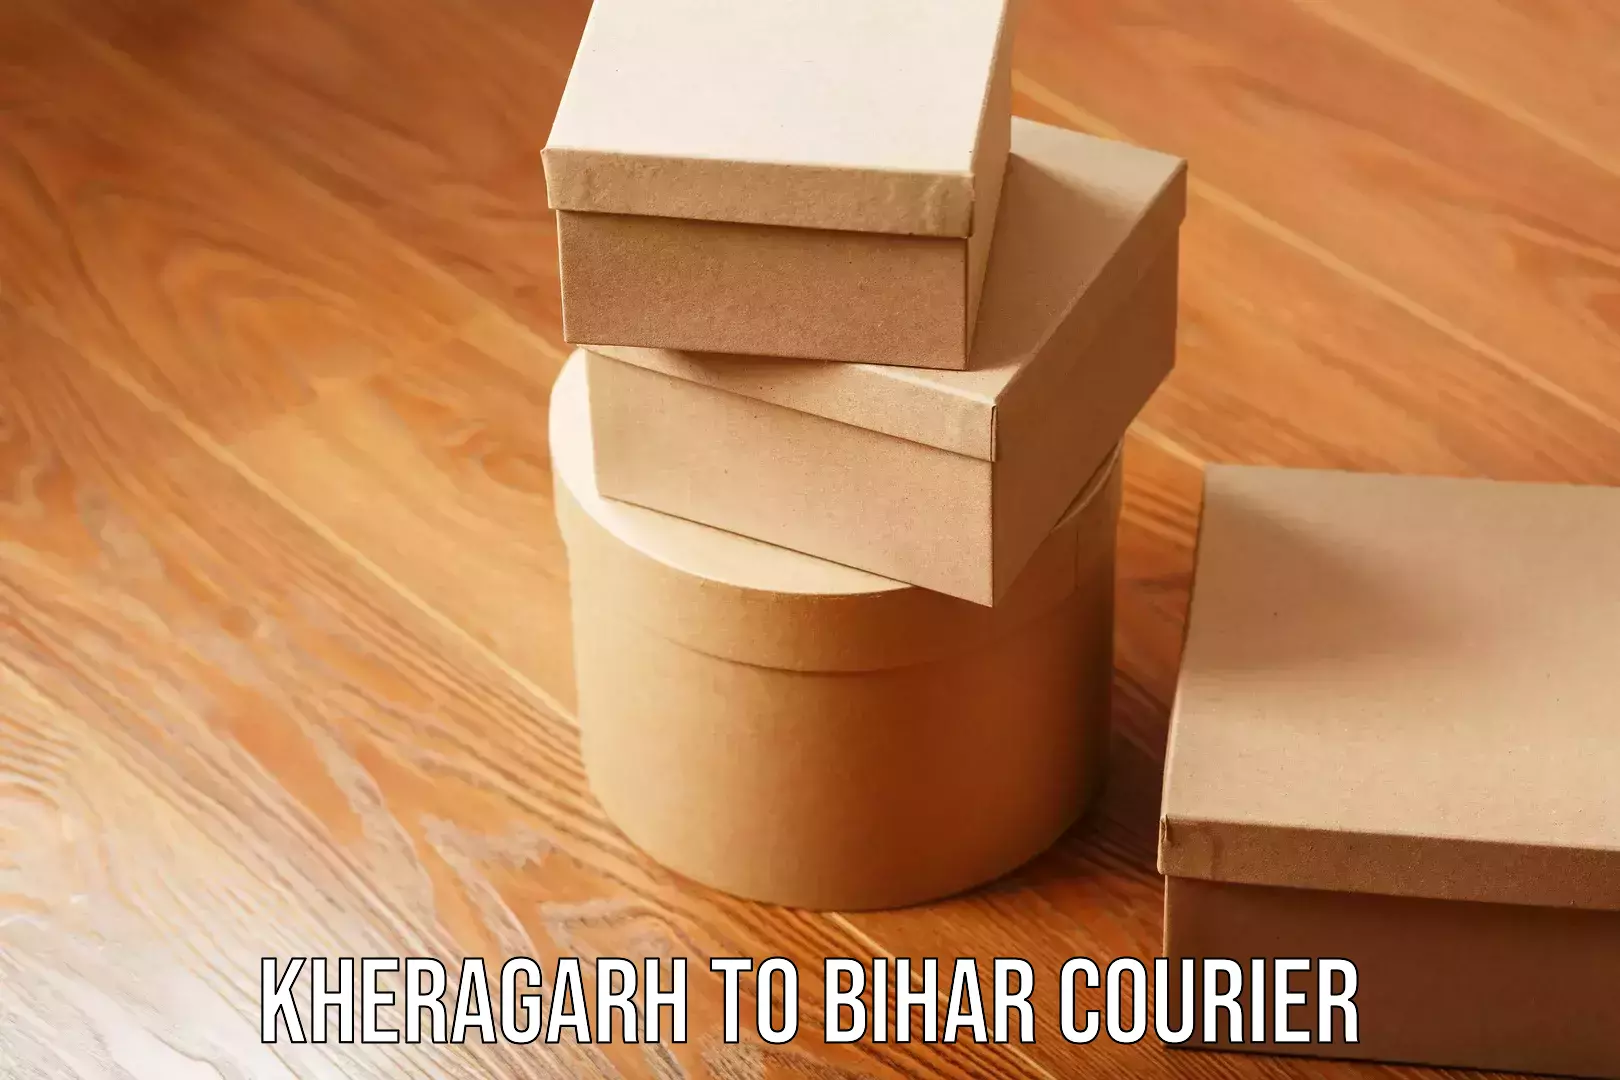 Packing and moving services in Kheragarh to Bihar